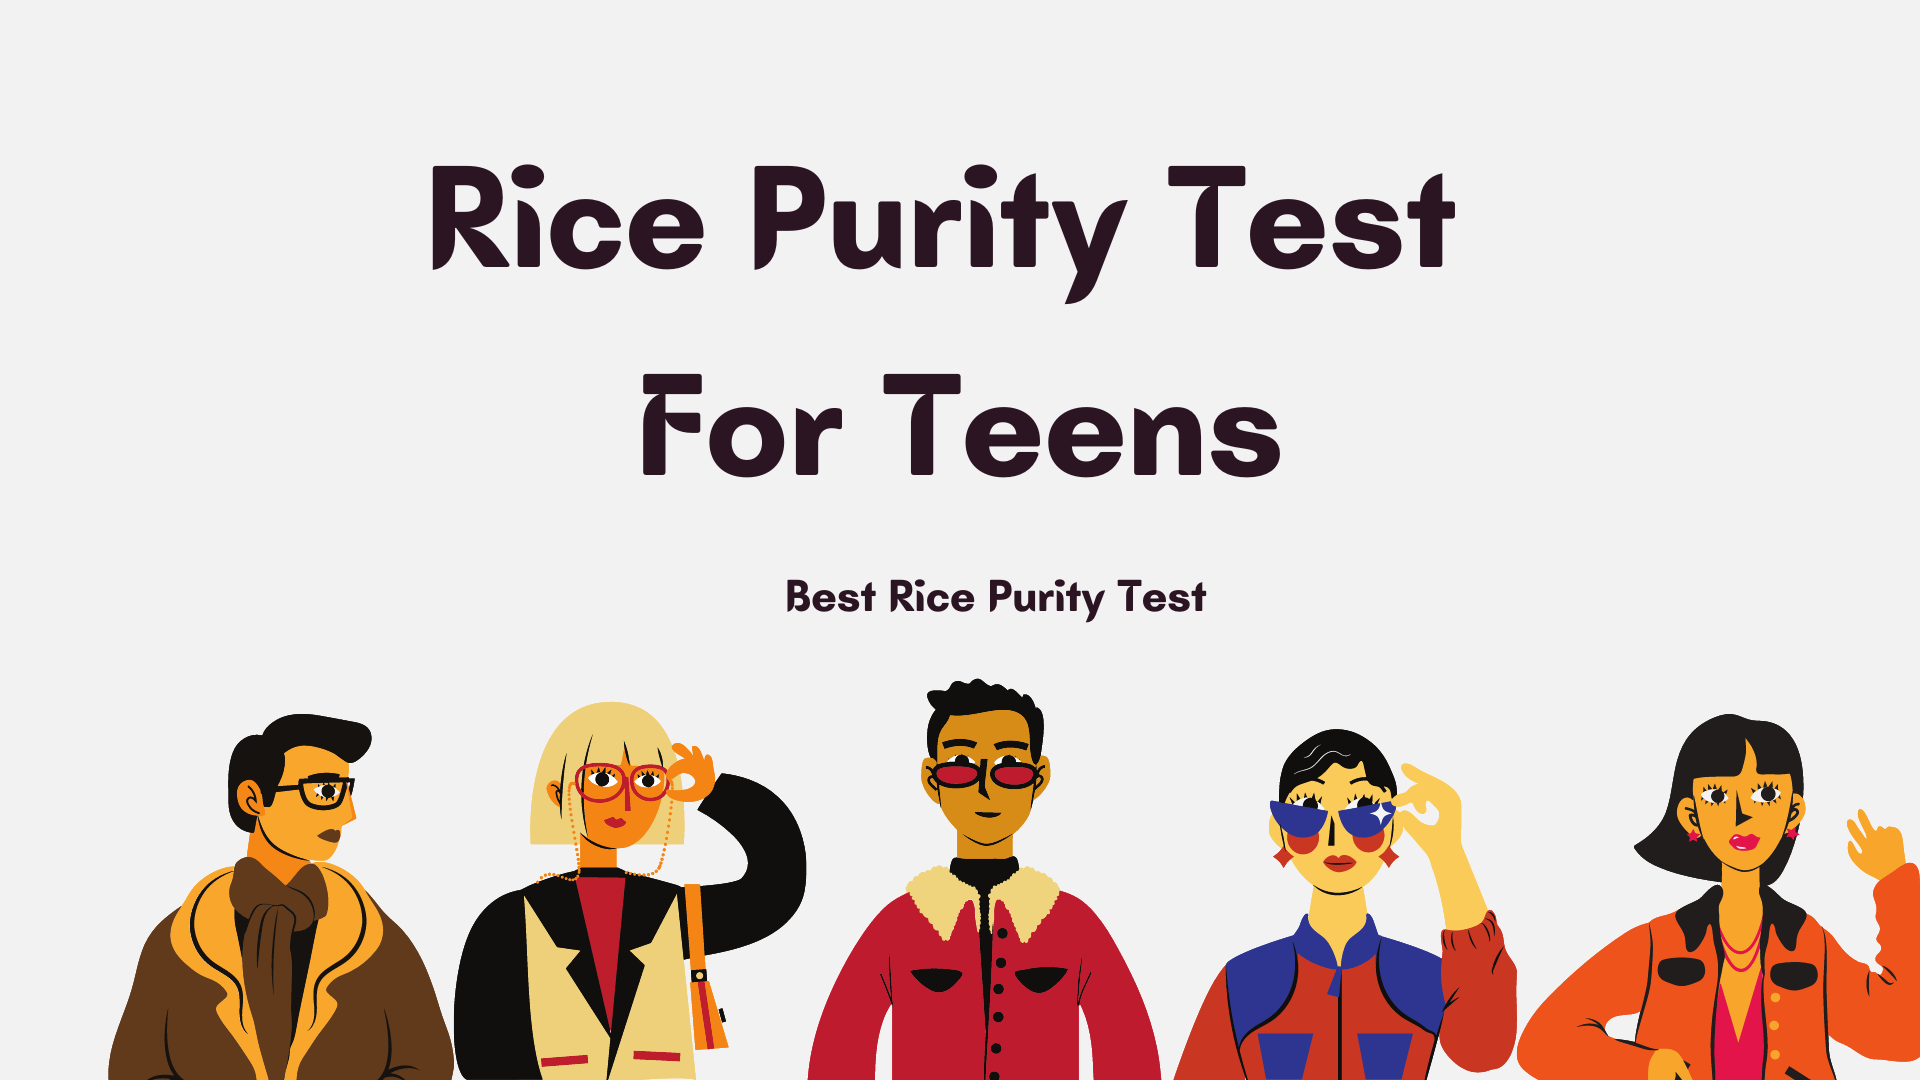 Rice Purity Test for Teens